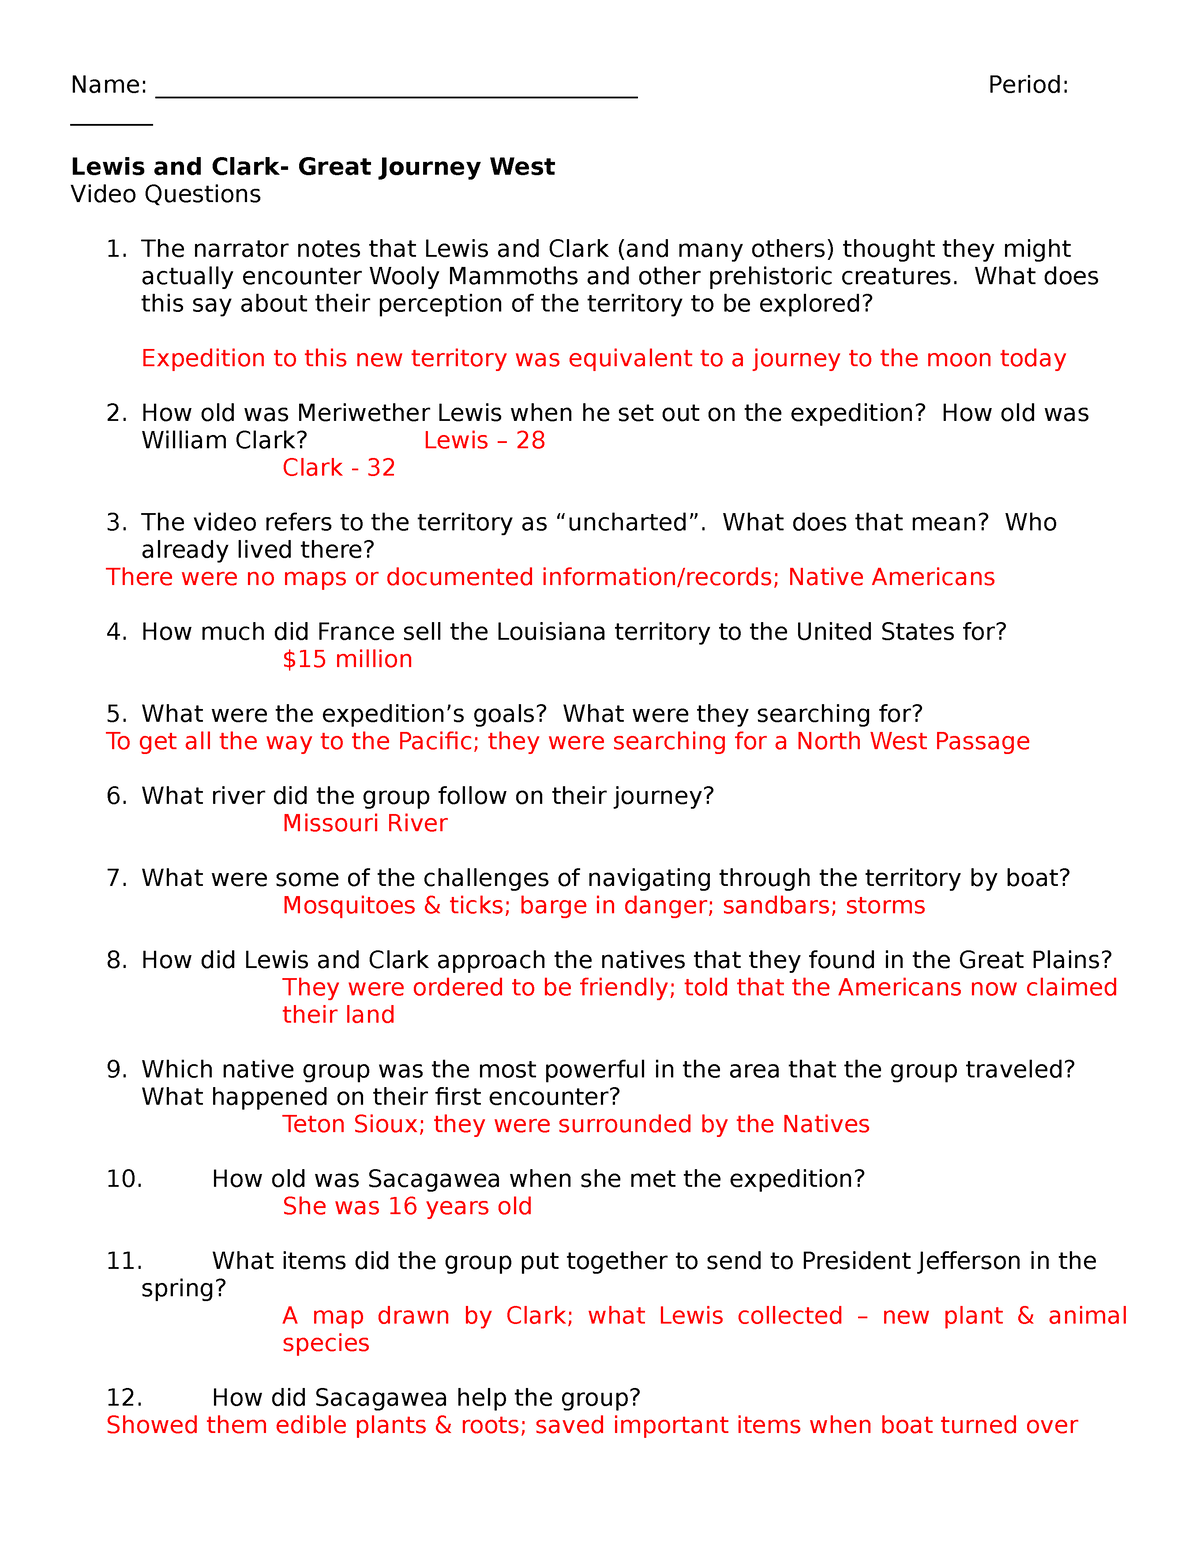 lewis and clark the great journey west questions